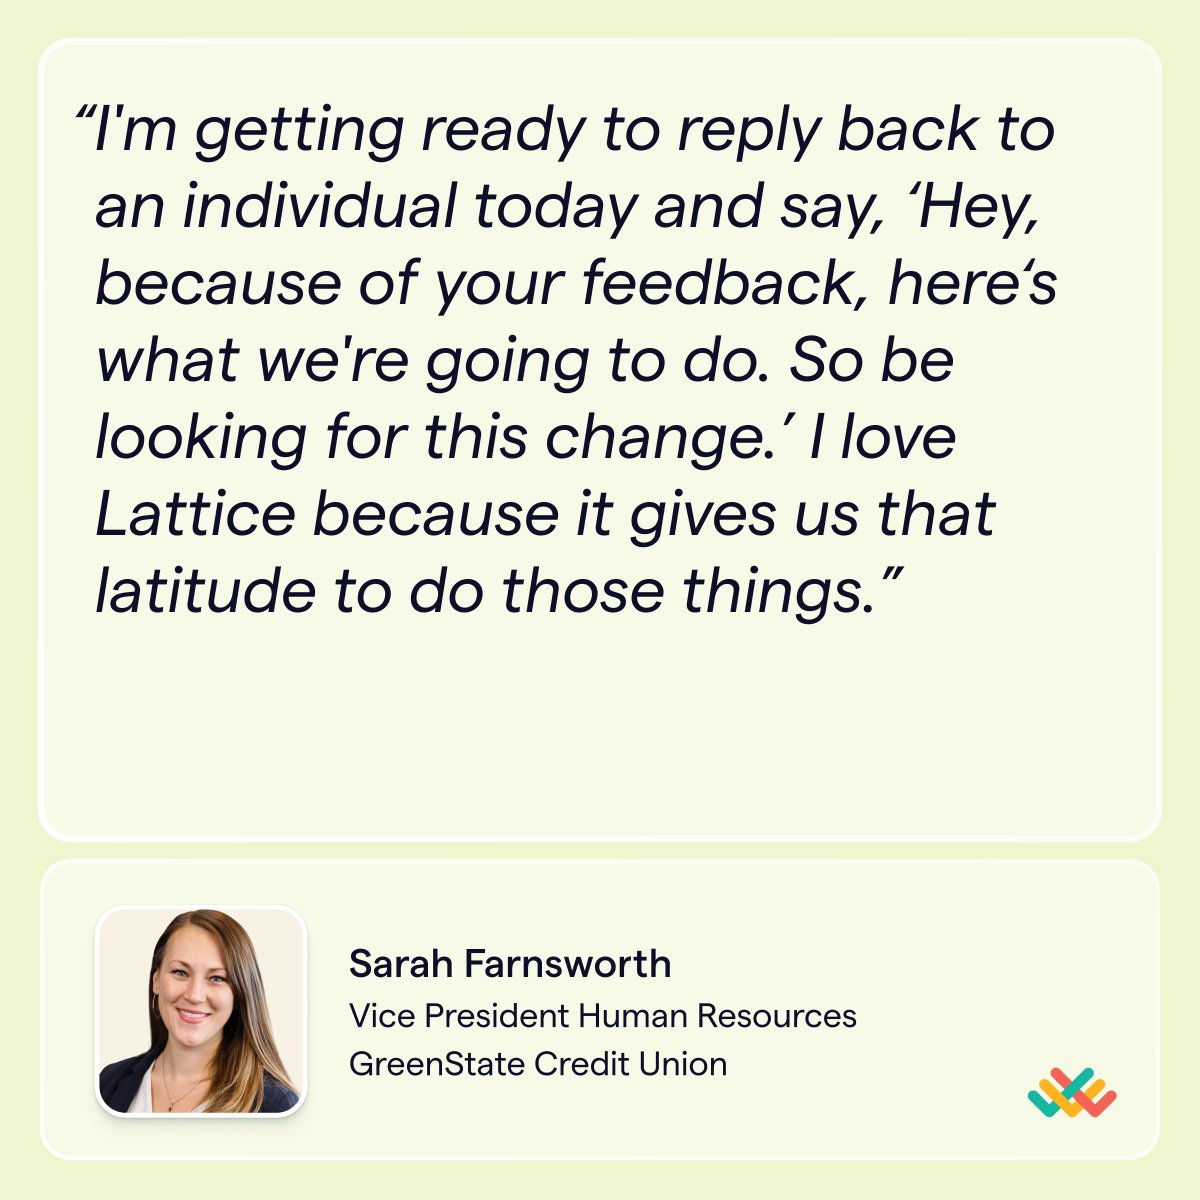 When @GreenStateCU needed a new solution to take their manual HR processes to the next level, they found a solution with Lattice's all-in-one platform. How they saved 300 hours annually in HR tasks with Lattice and you can too: bit.ly/4bcMGAx